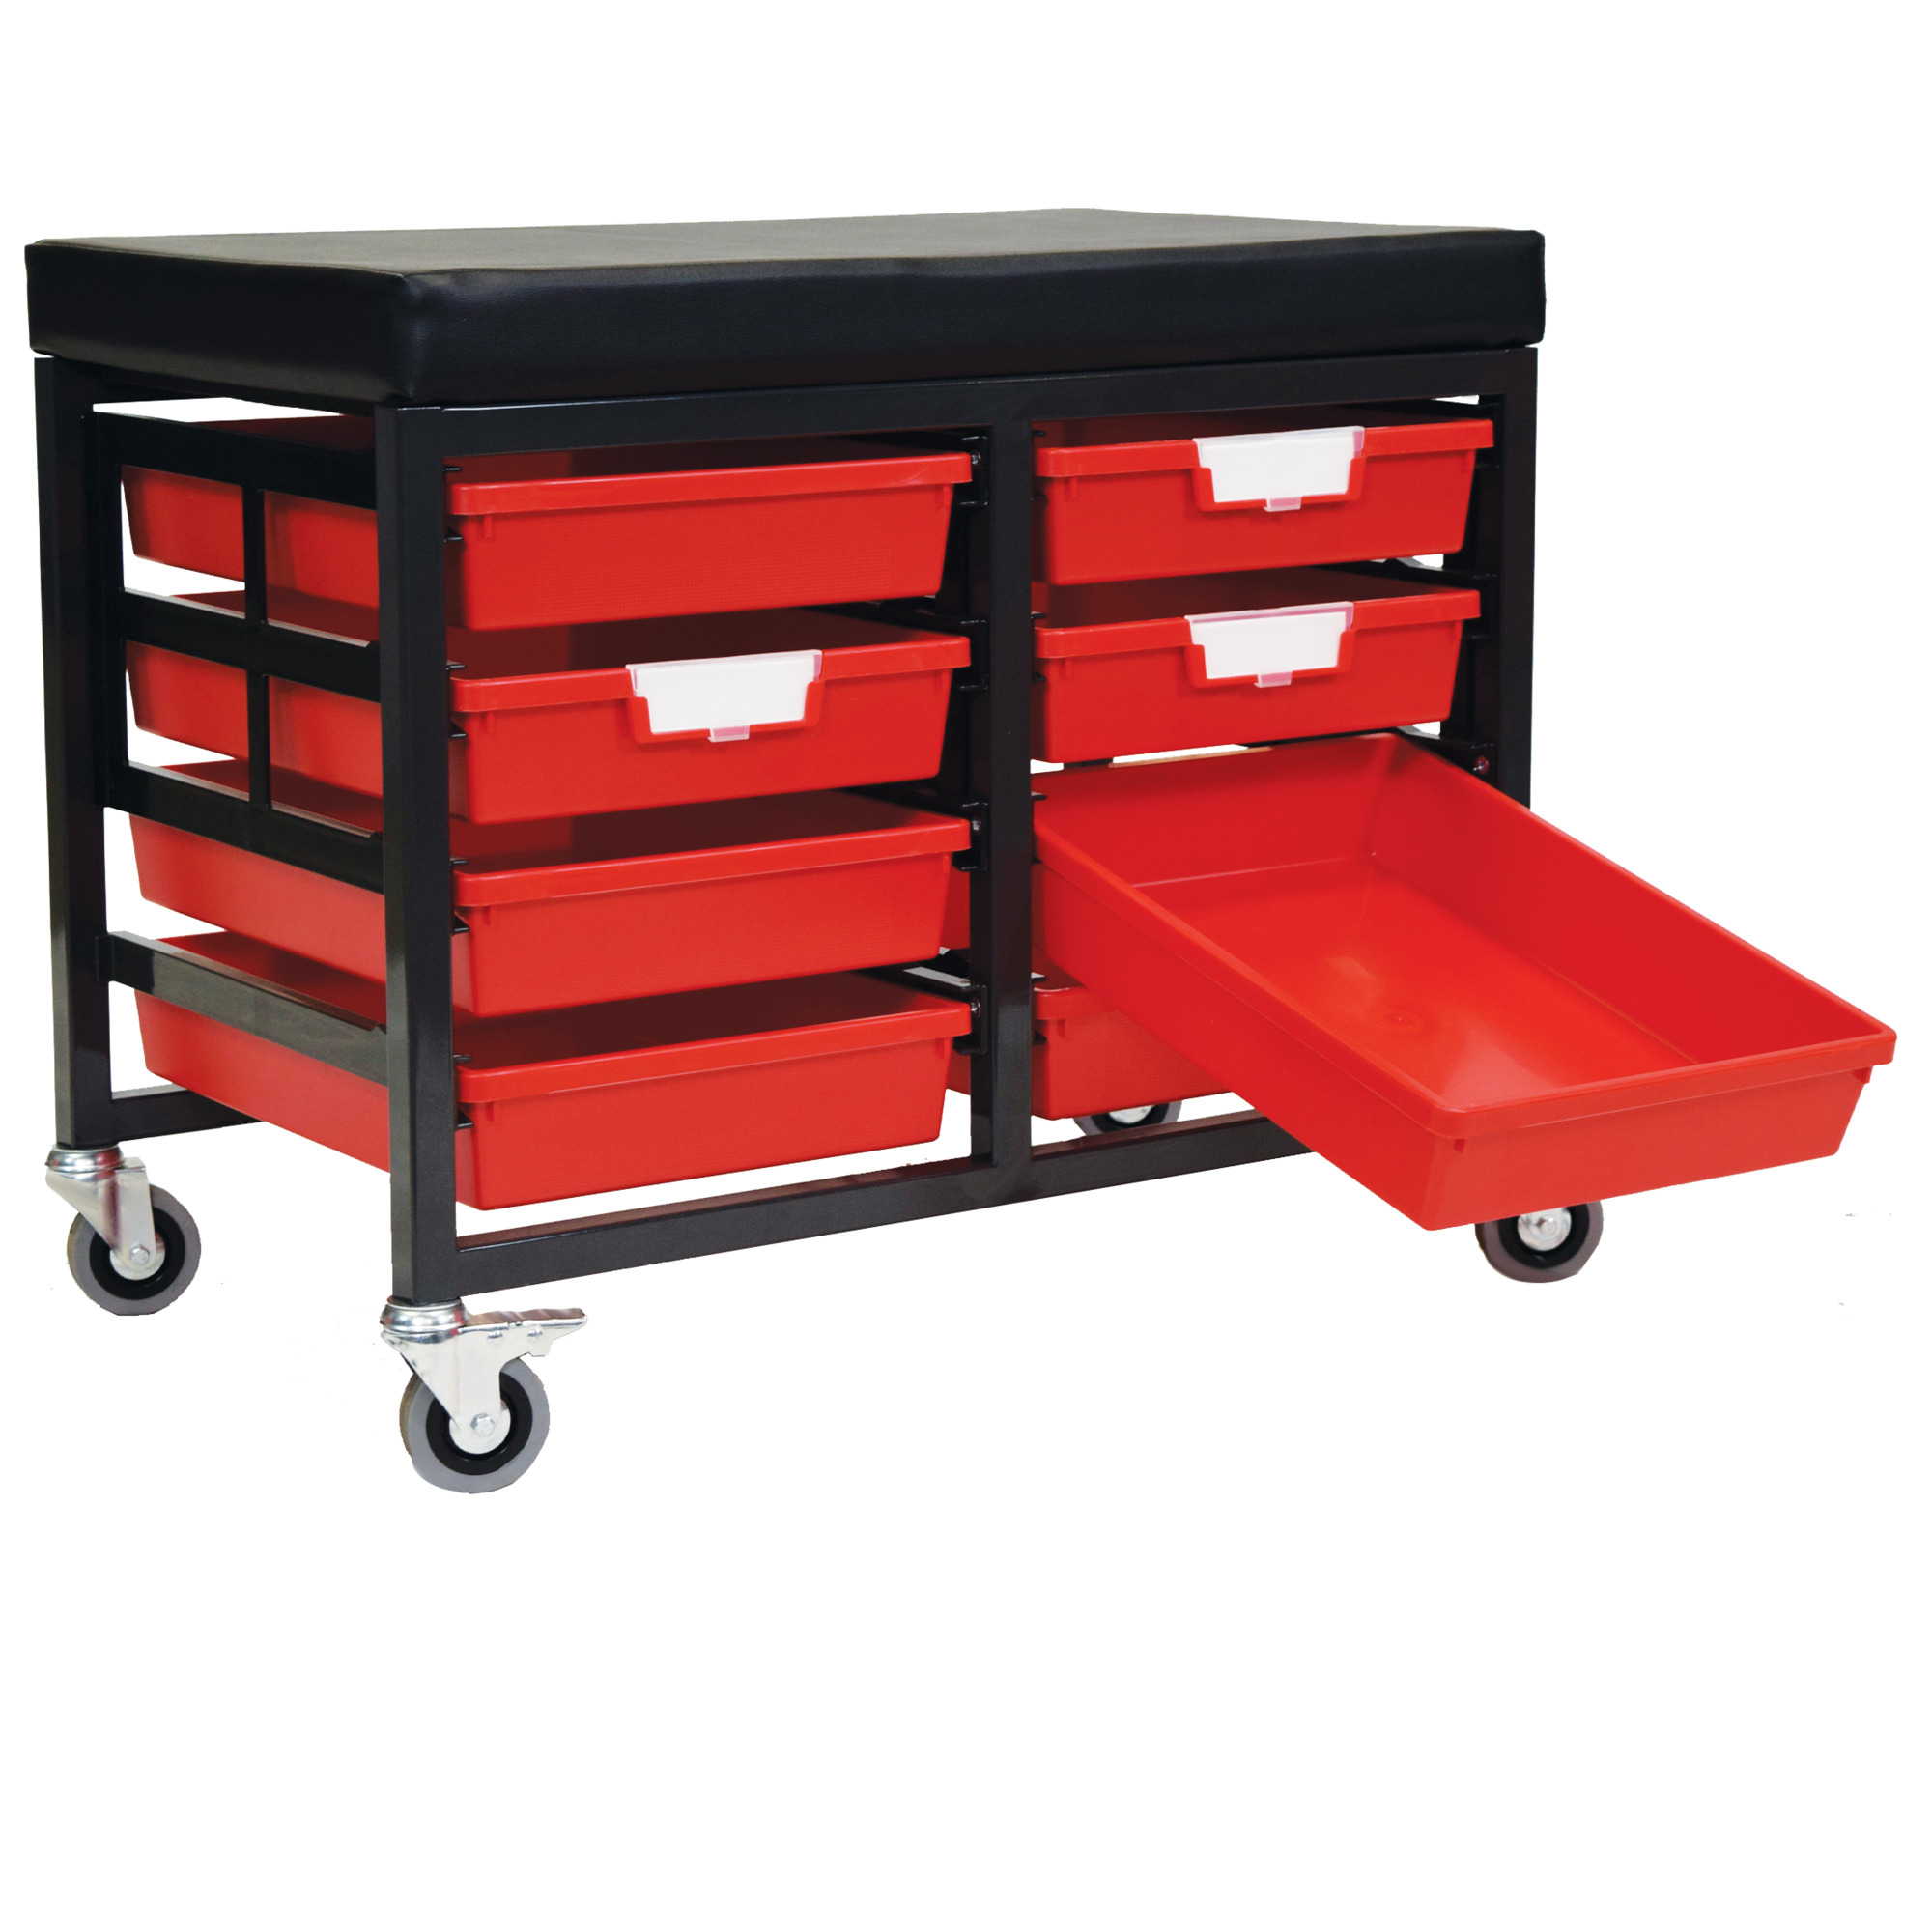 Certwood StorWerks, StorBenchSeat w/ 8 Storsystem Trays and Bins-Red, Included (qty.) 8, Material Plastic, Height 12 in, Model CE2109DGGC-8SPR